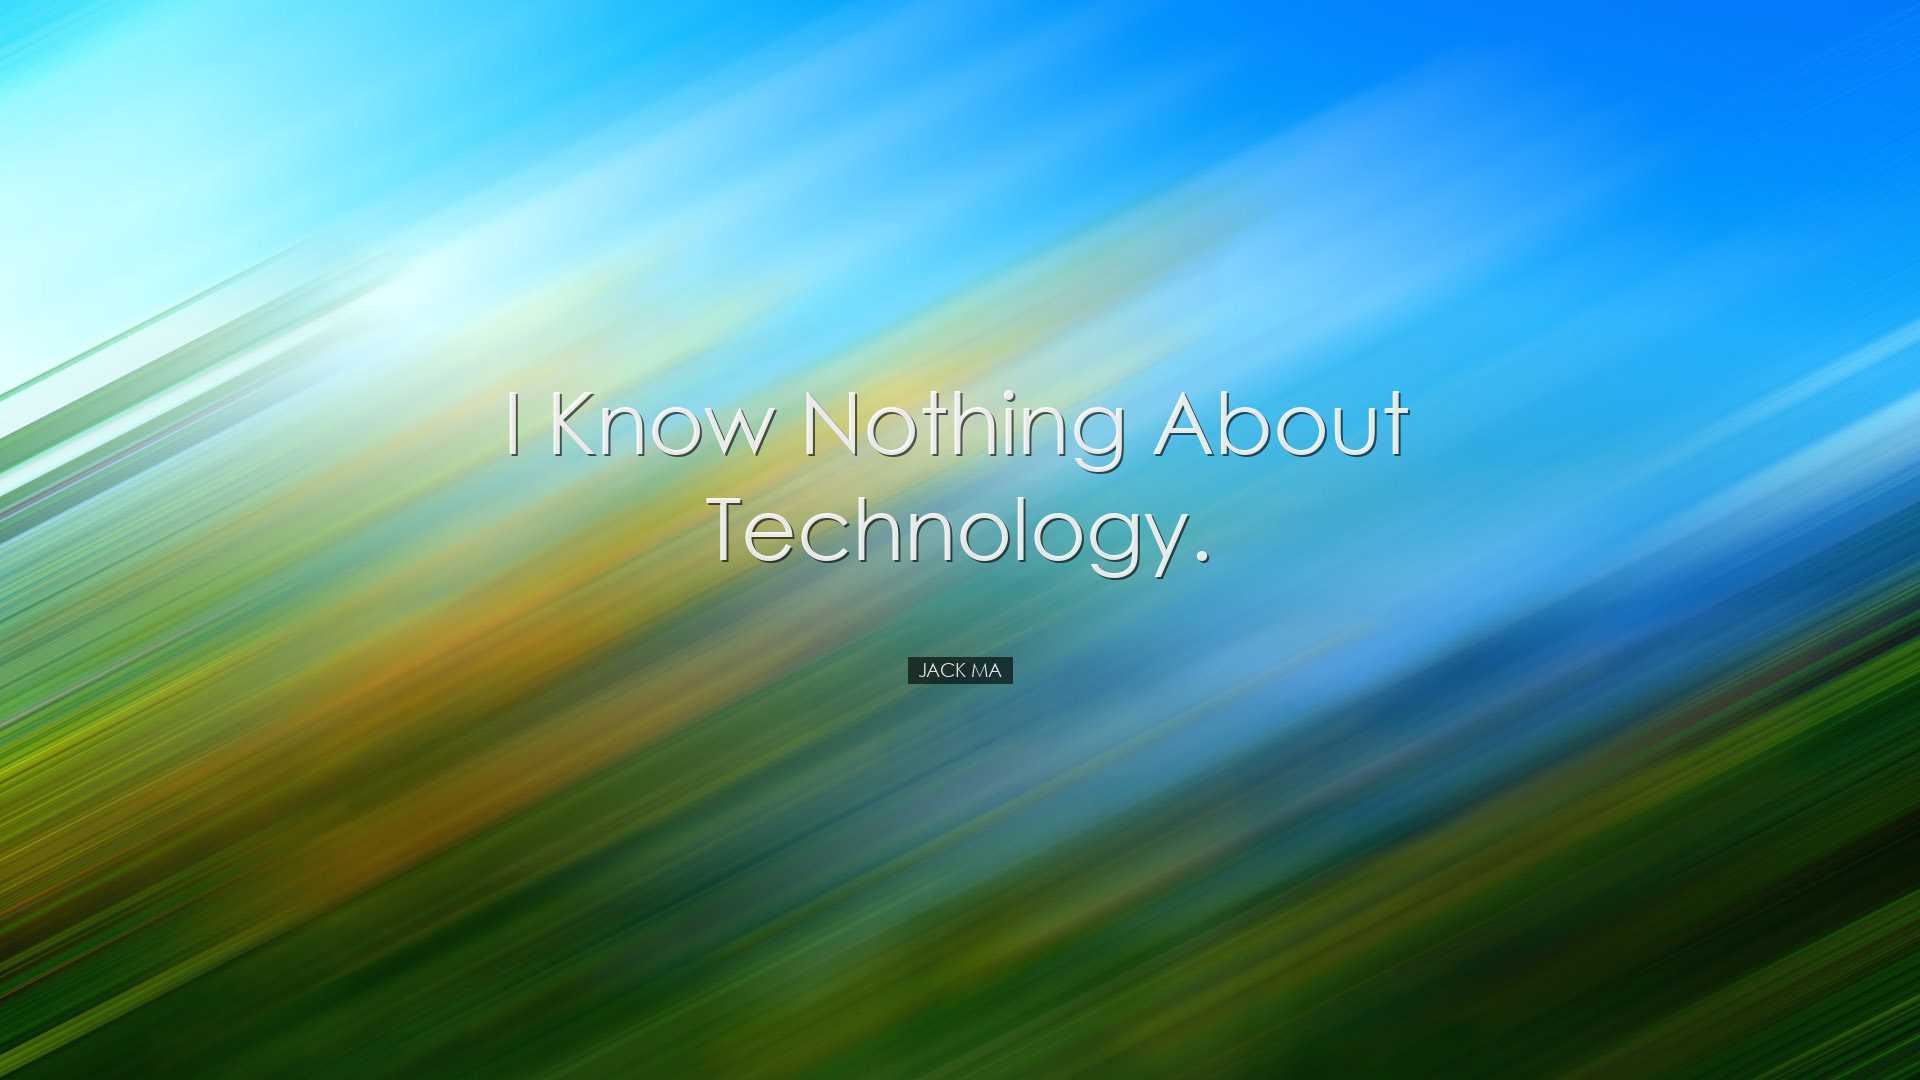 I know nothing about technology. - Jack Ma